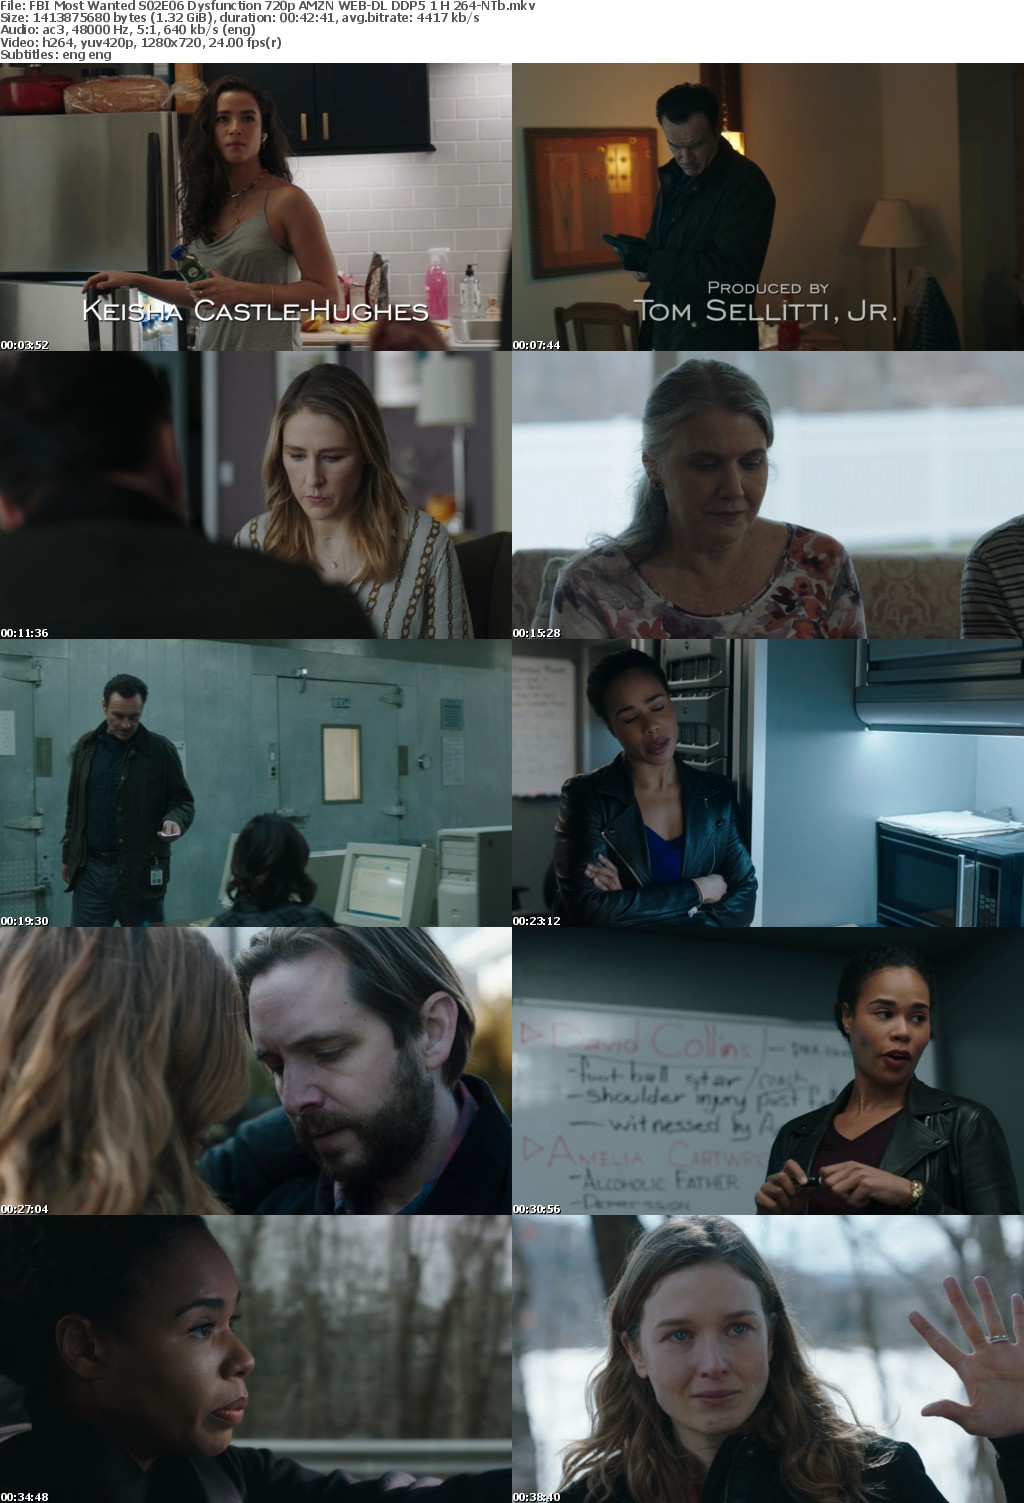 FBI Most Wanted S02E06 Dysfunction 720p AMZN WEB-DL DDP5 1 H 264-NTb